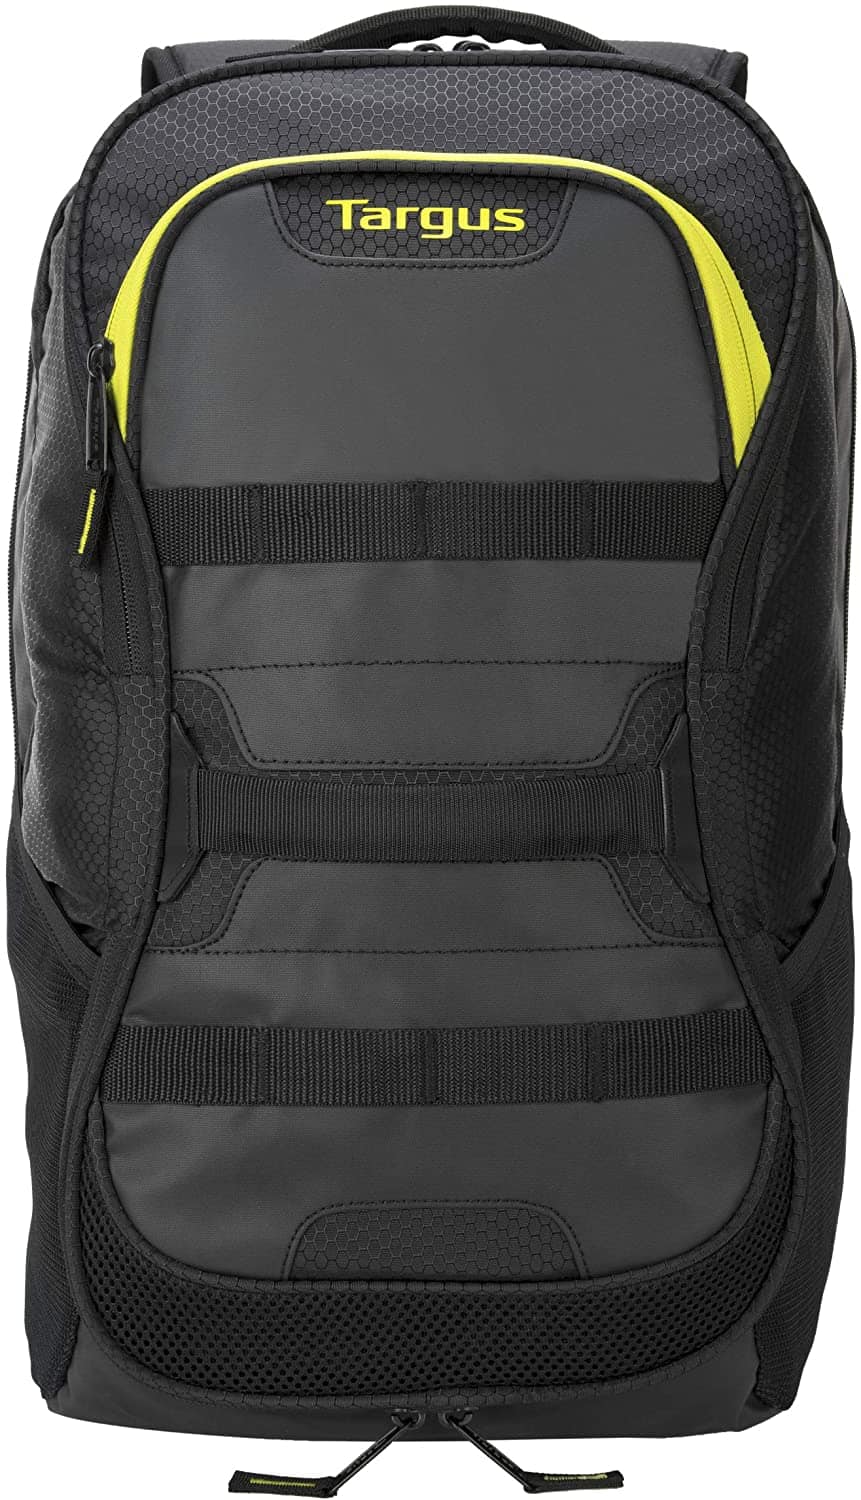 Targus Large Commuter Work and Play Large Gym Fitness Backpack ONLY $32.99 (Reg $90)